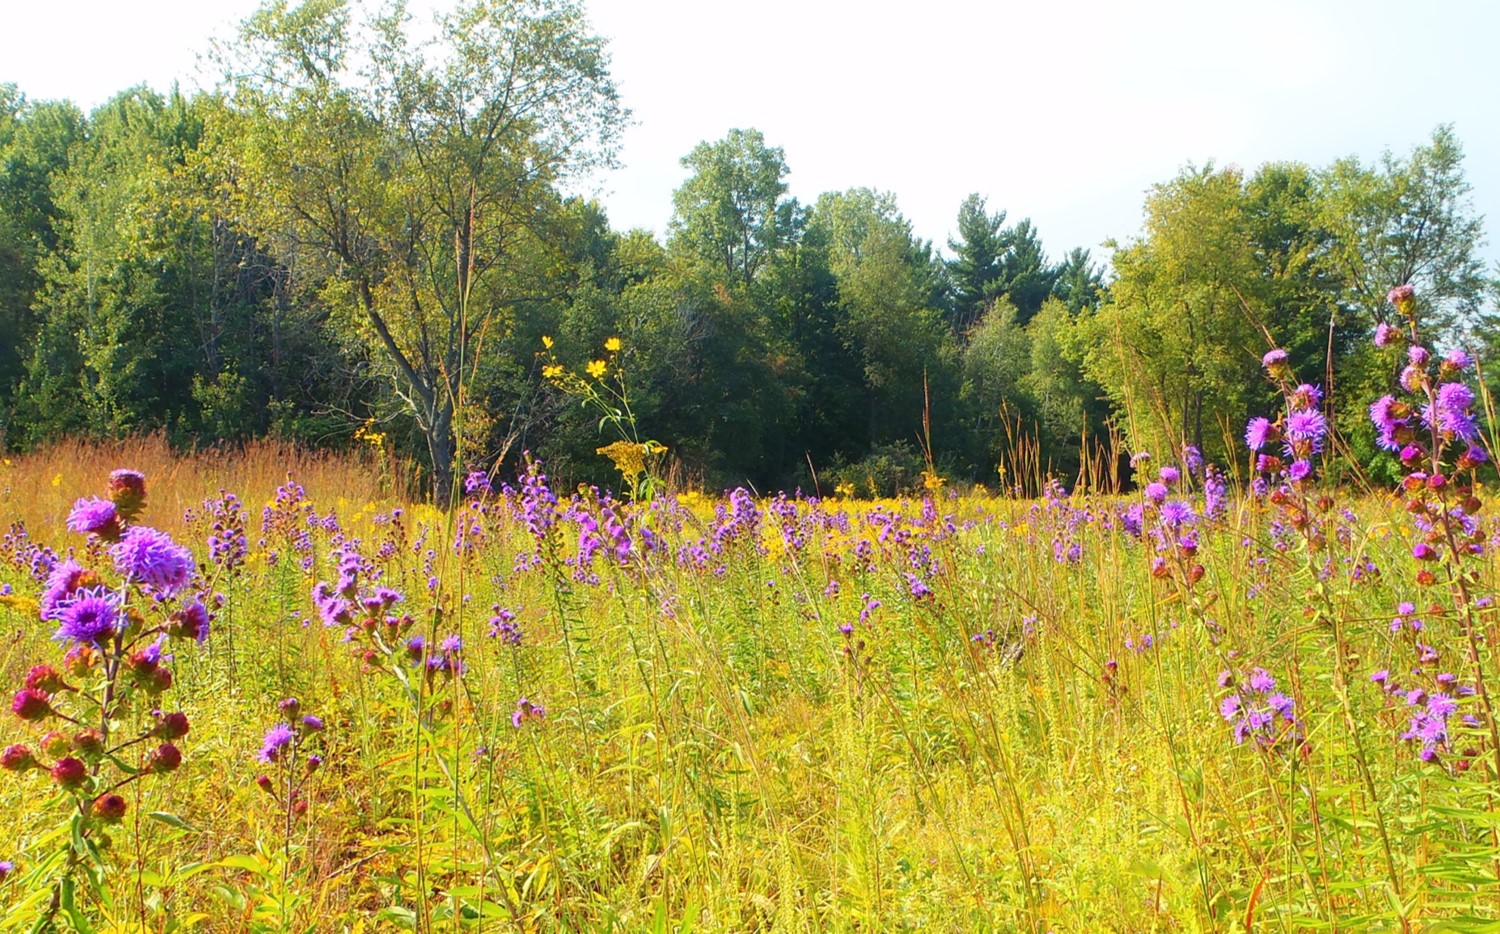 Detroit’s backyard beauty: Conserving one of the ‘last great places on Earth’